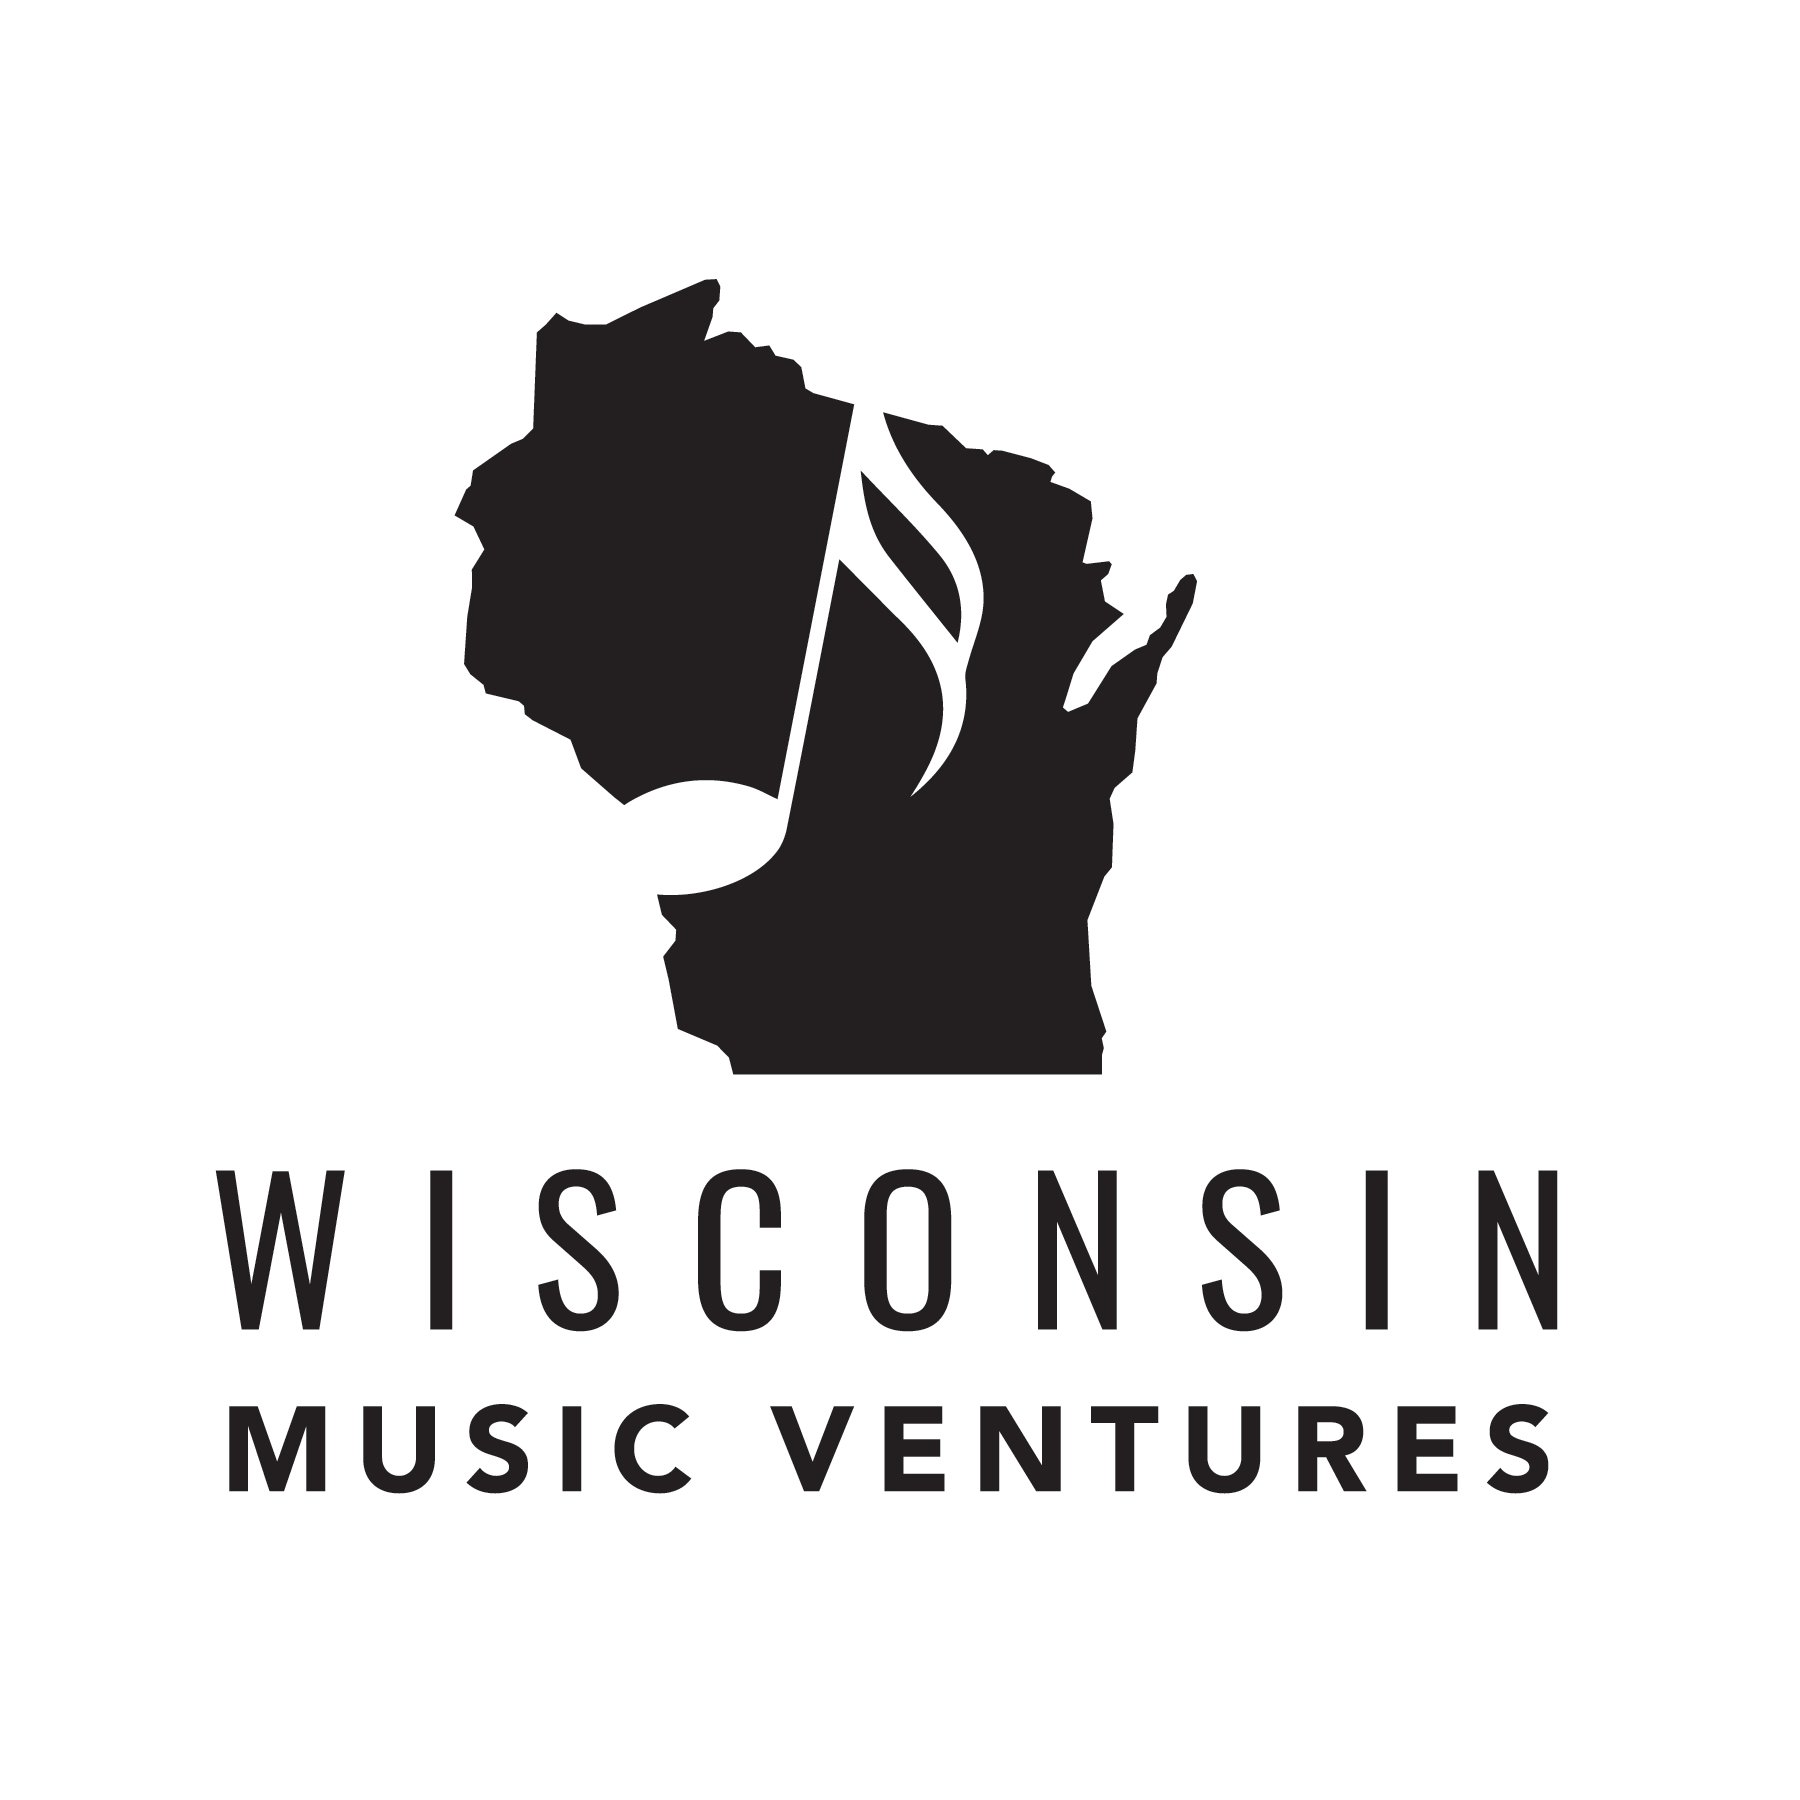 A Live Music Community: Helping Musicians to Thrive in Wisconsin